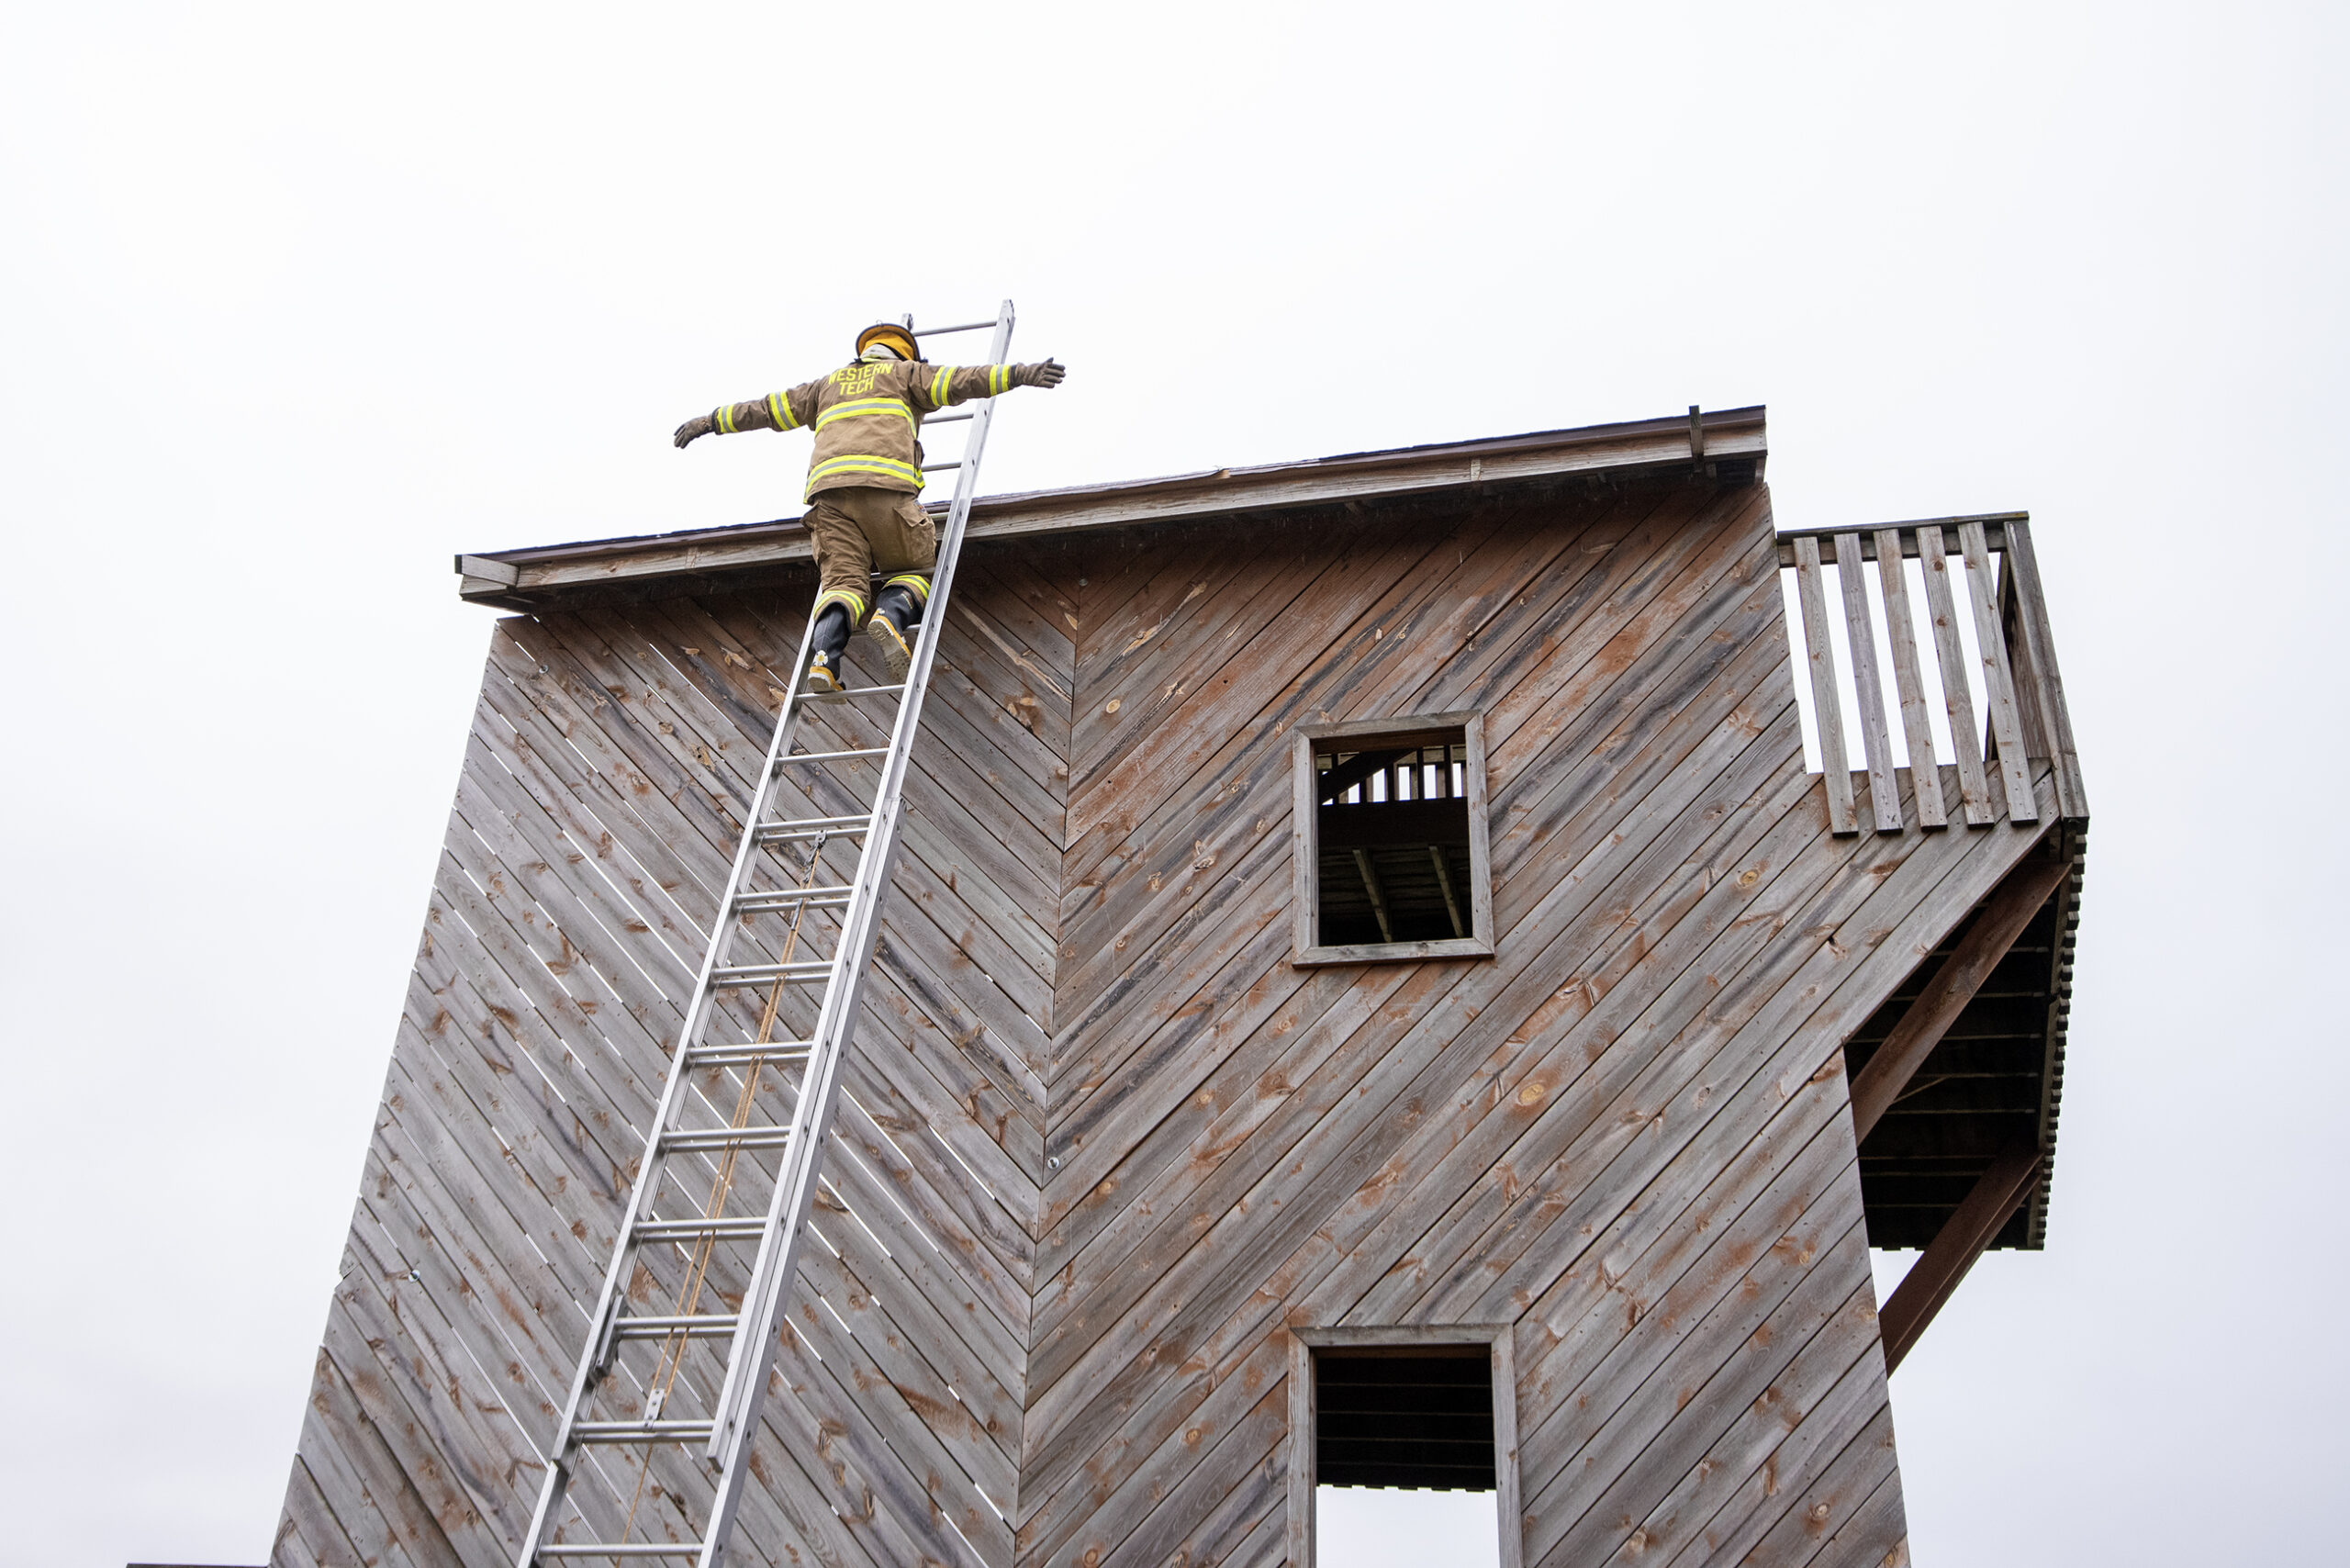 A student spreads their arms after reaching the roof of a small wooden structure by using a tall metal ladder.